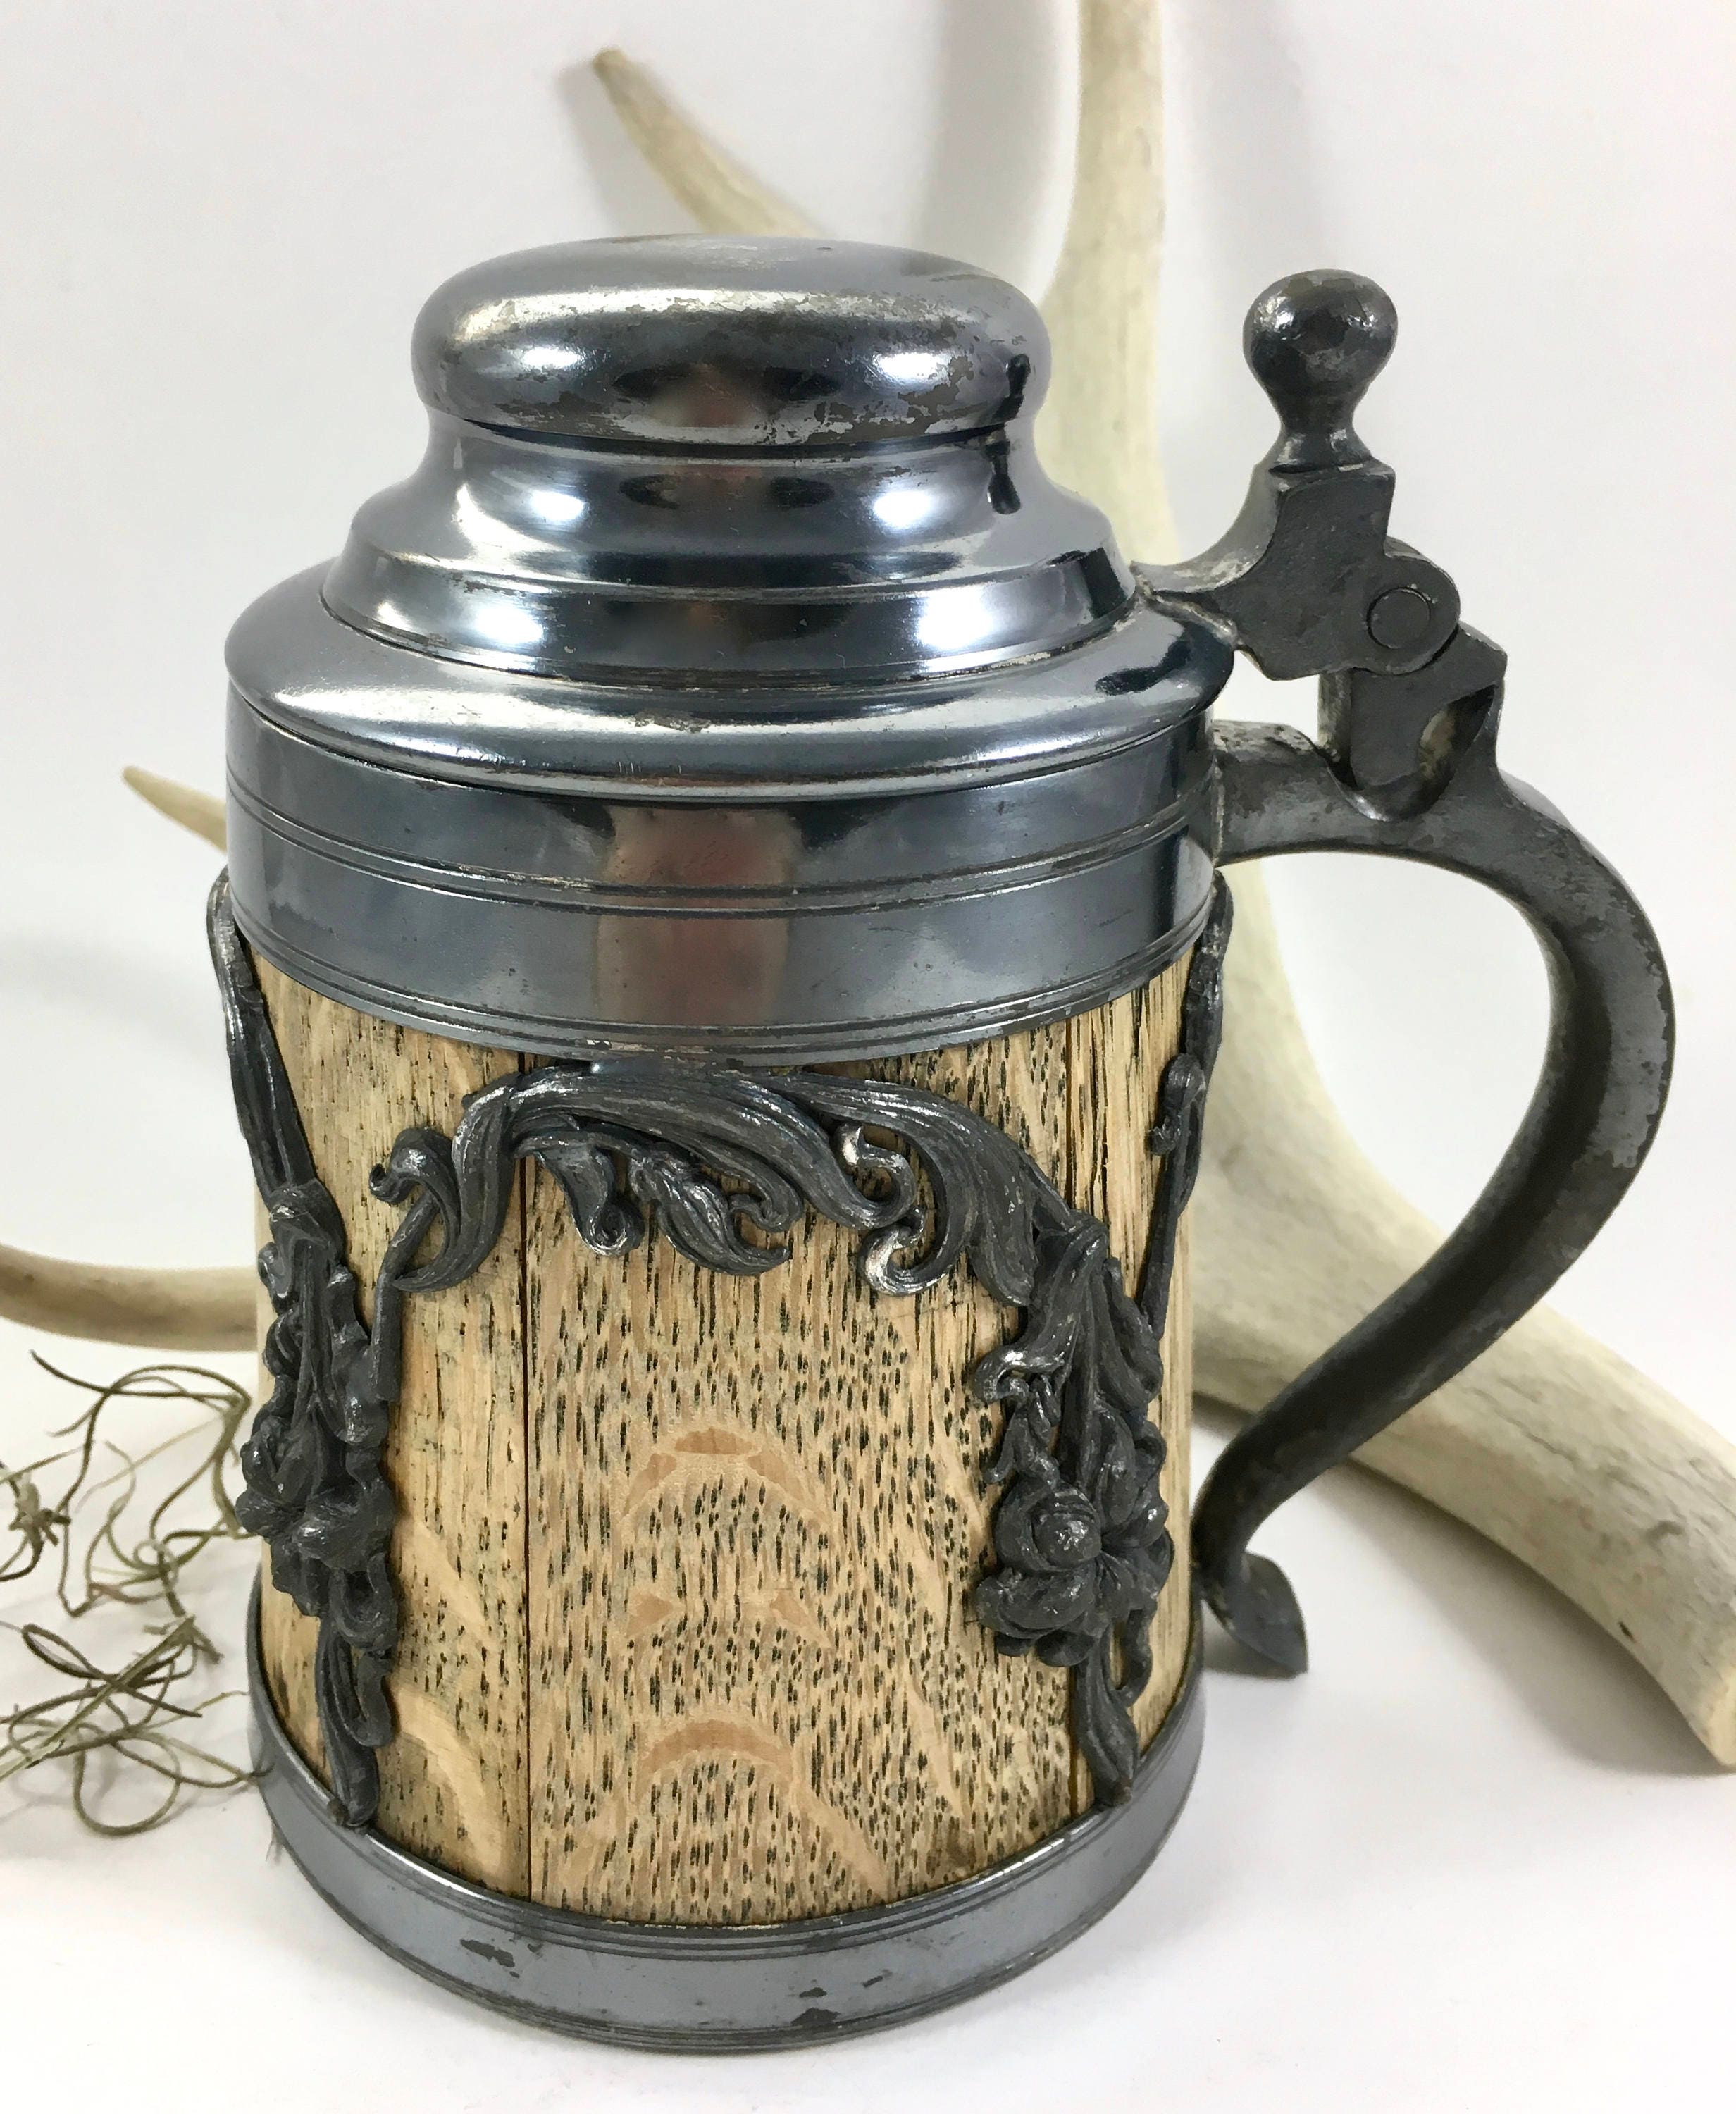 Sold at Auction: St. Louis Silver Co. Quadruple Plate & Wood Stein